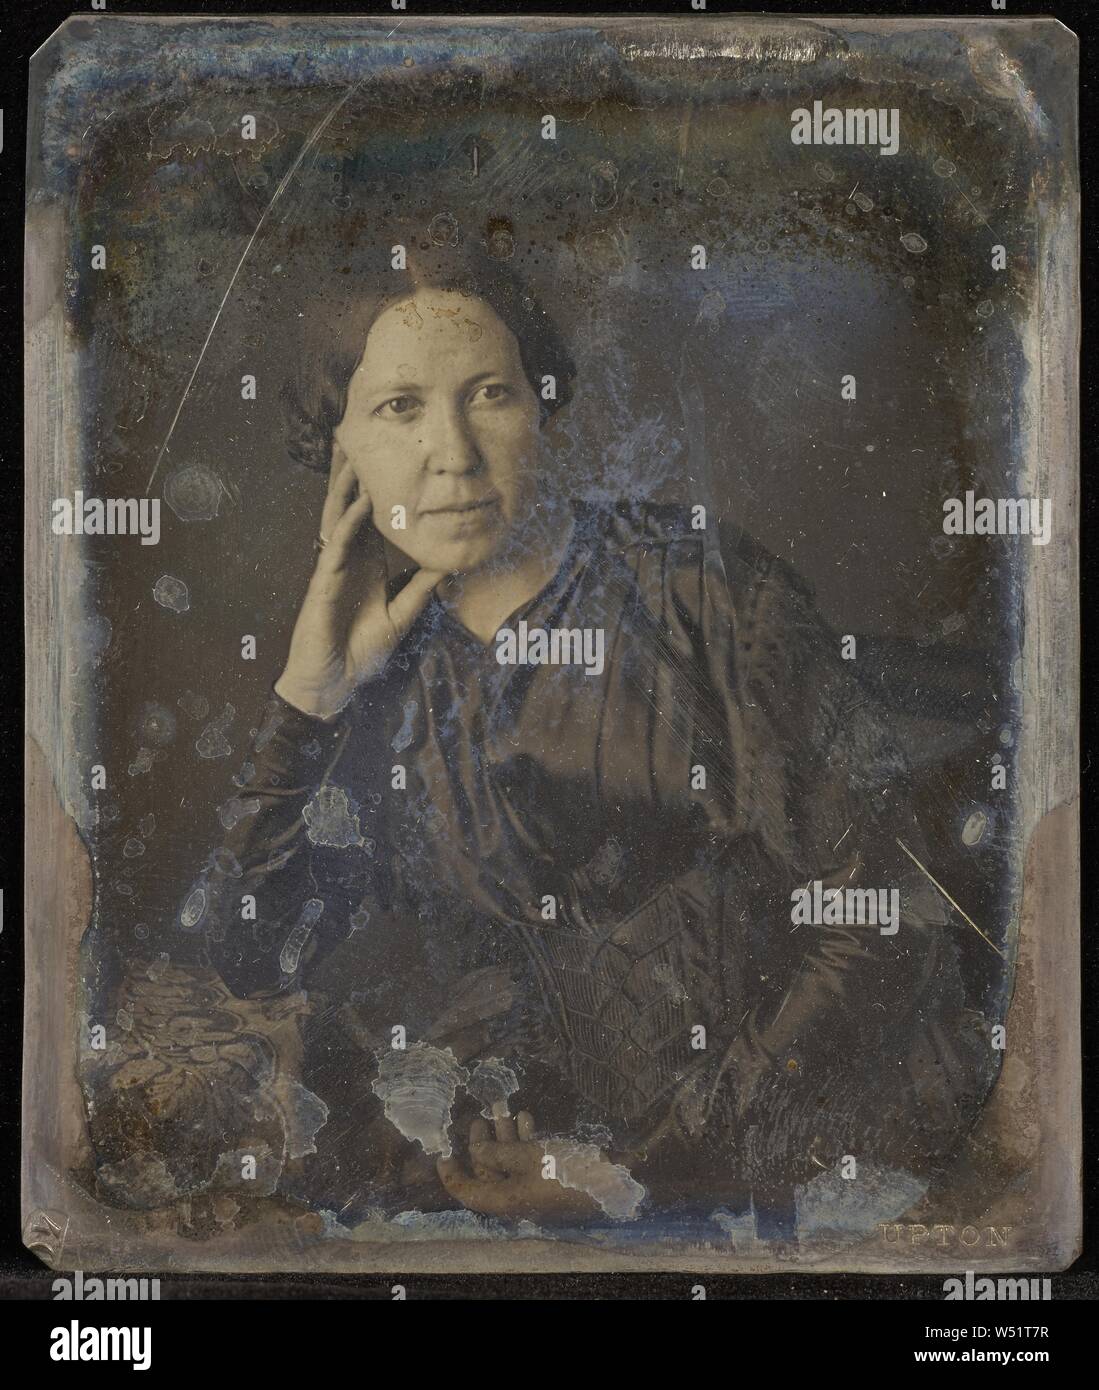 Portrait of Miss Martin of Maine, B. F. Upton (American, born 1818, active Minneapolis and St. Anthony, Minnesota, Bath, Maine and Chicago, Illinois 1857 - 1879), about 1855, Daguerreotype, 8.1 × 6.8 cm (3 3/16 × 2 11/16 in Stock Photo